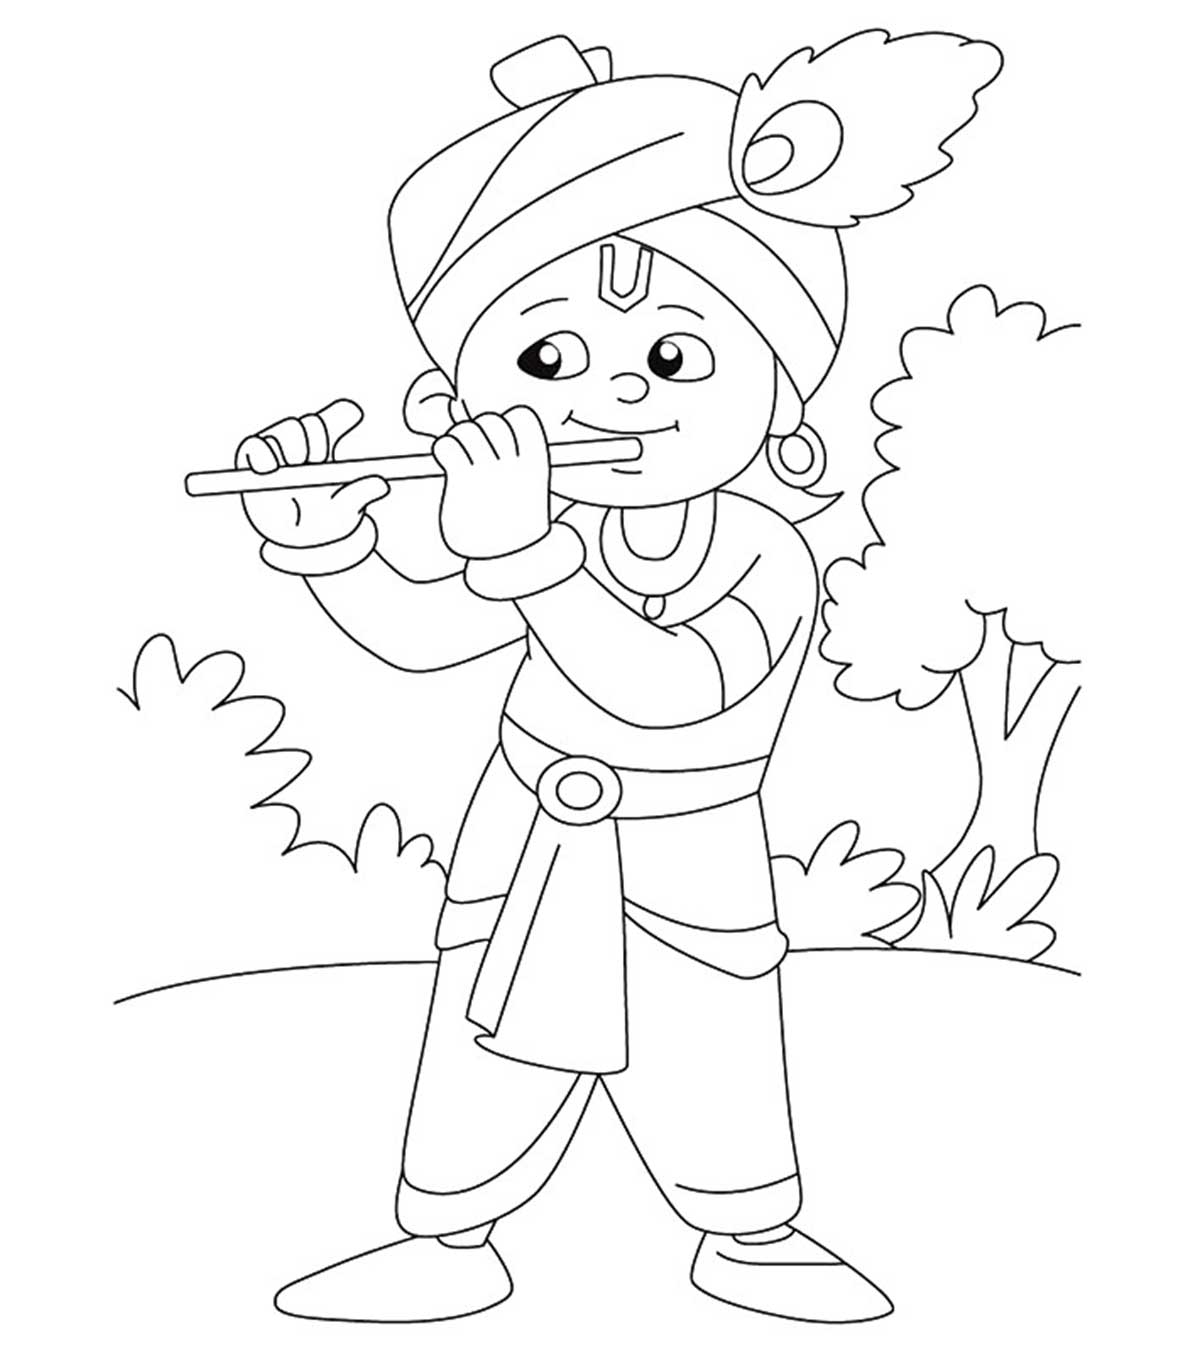 10 Best Flute Coloring Pages Your Toddler Will Love_image